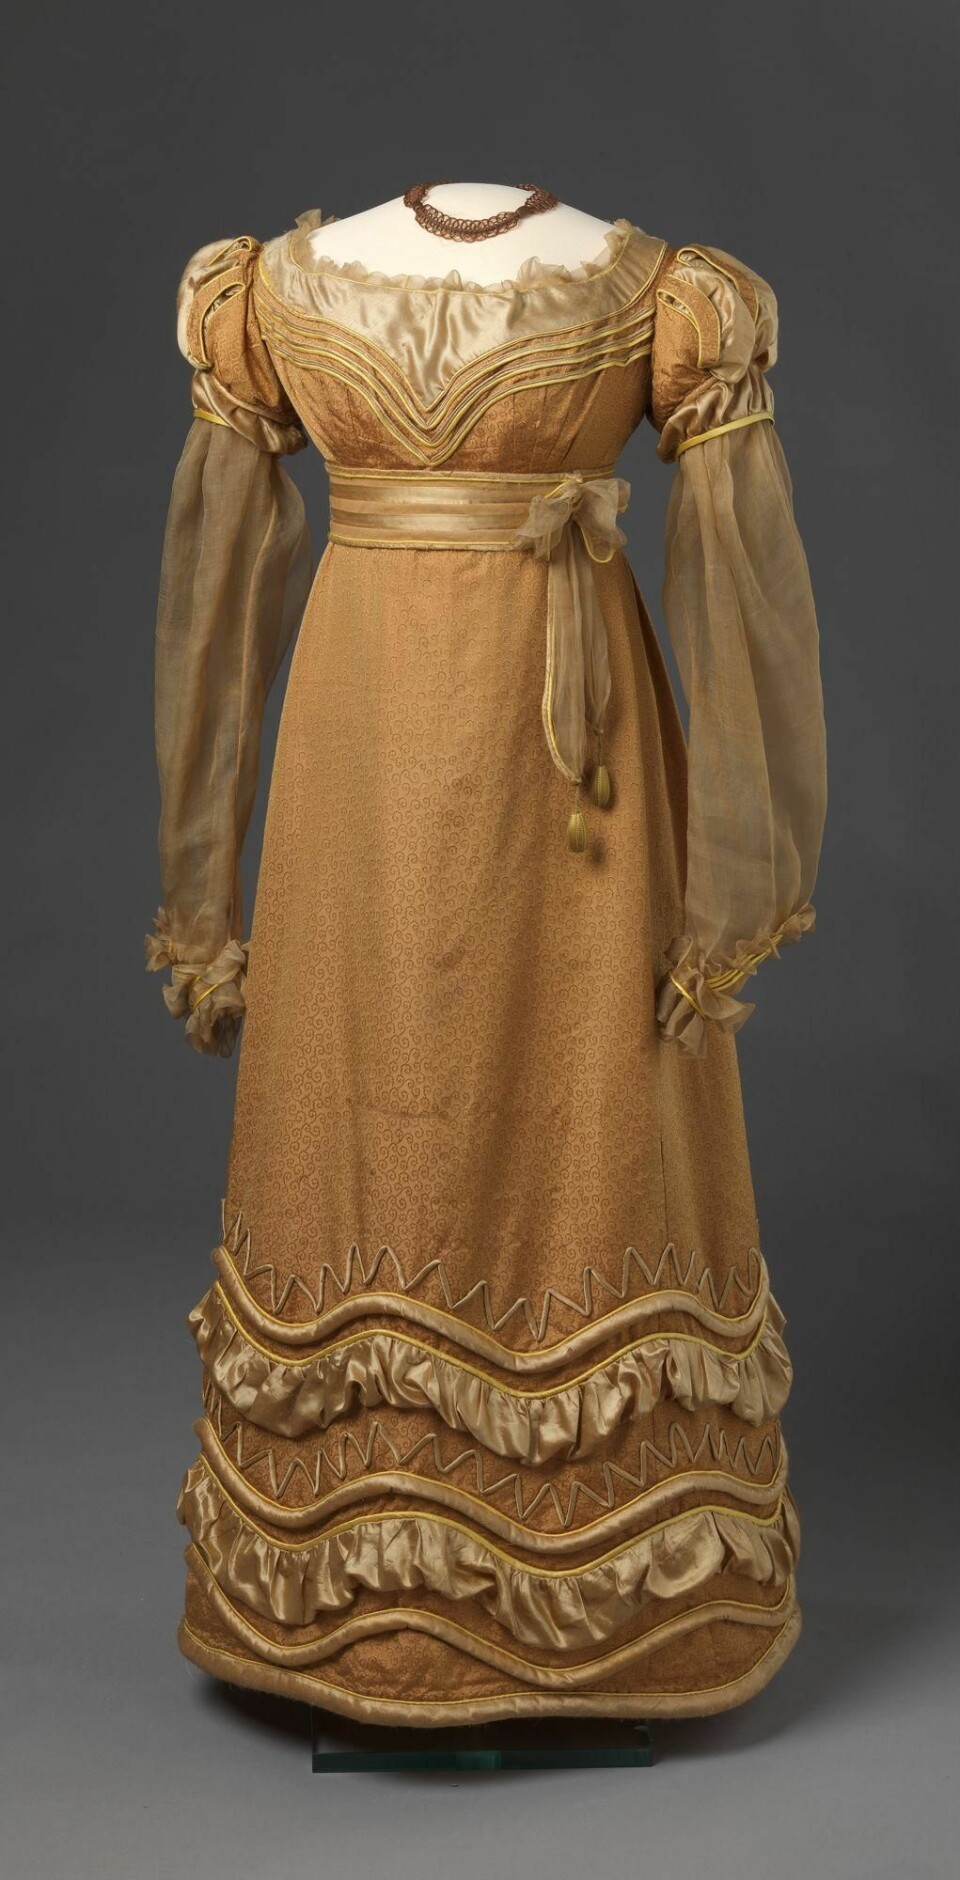 The dress is from 1825 and is probably hand-sewn from silk fabric and satin. (Photo: National Museum of Art, Architecture and Design)